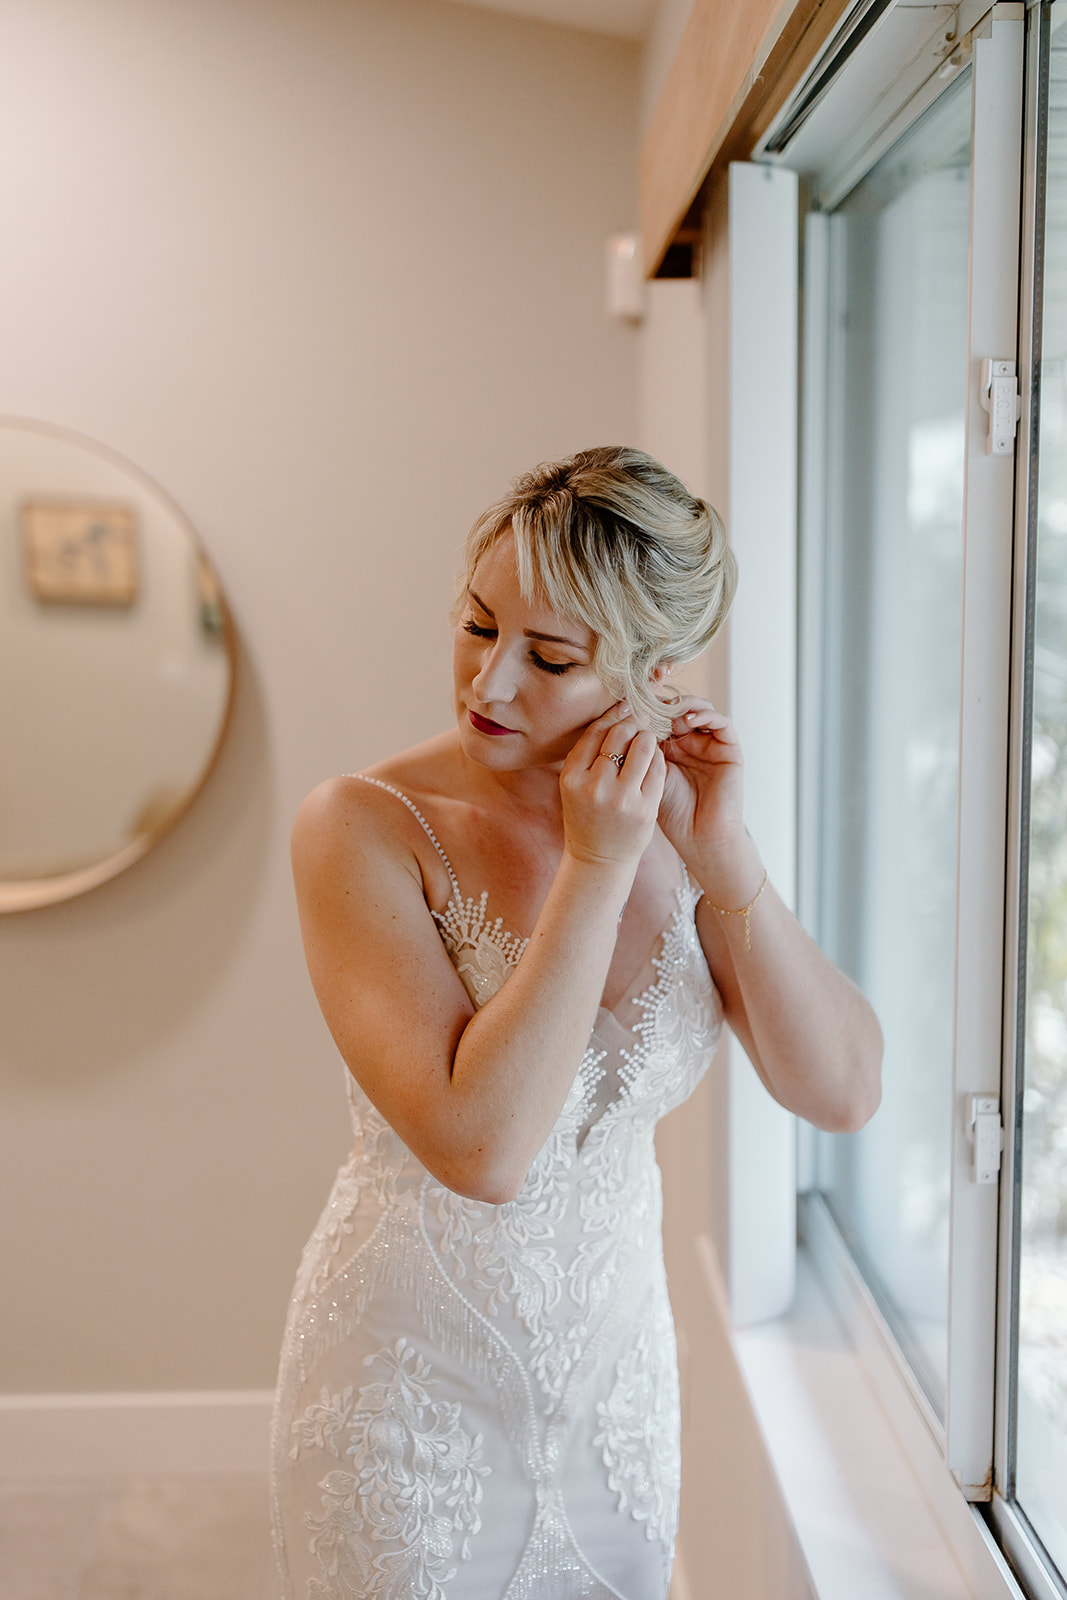 Bride puts her earrings in while standing in front of a window